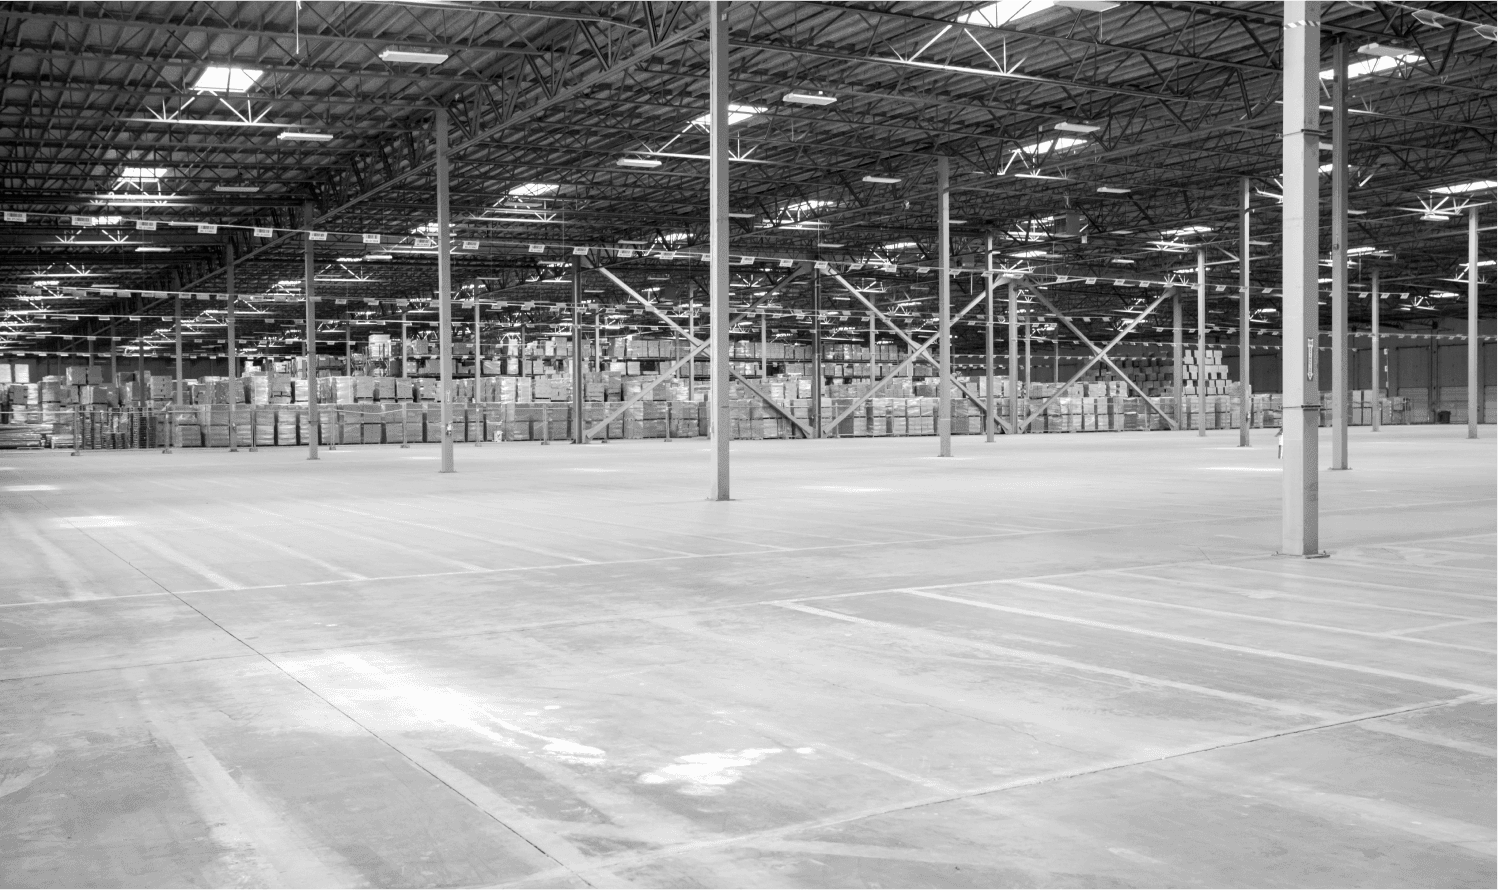 A large warehouse stands mostly empty.